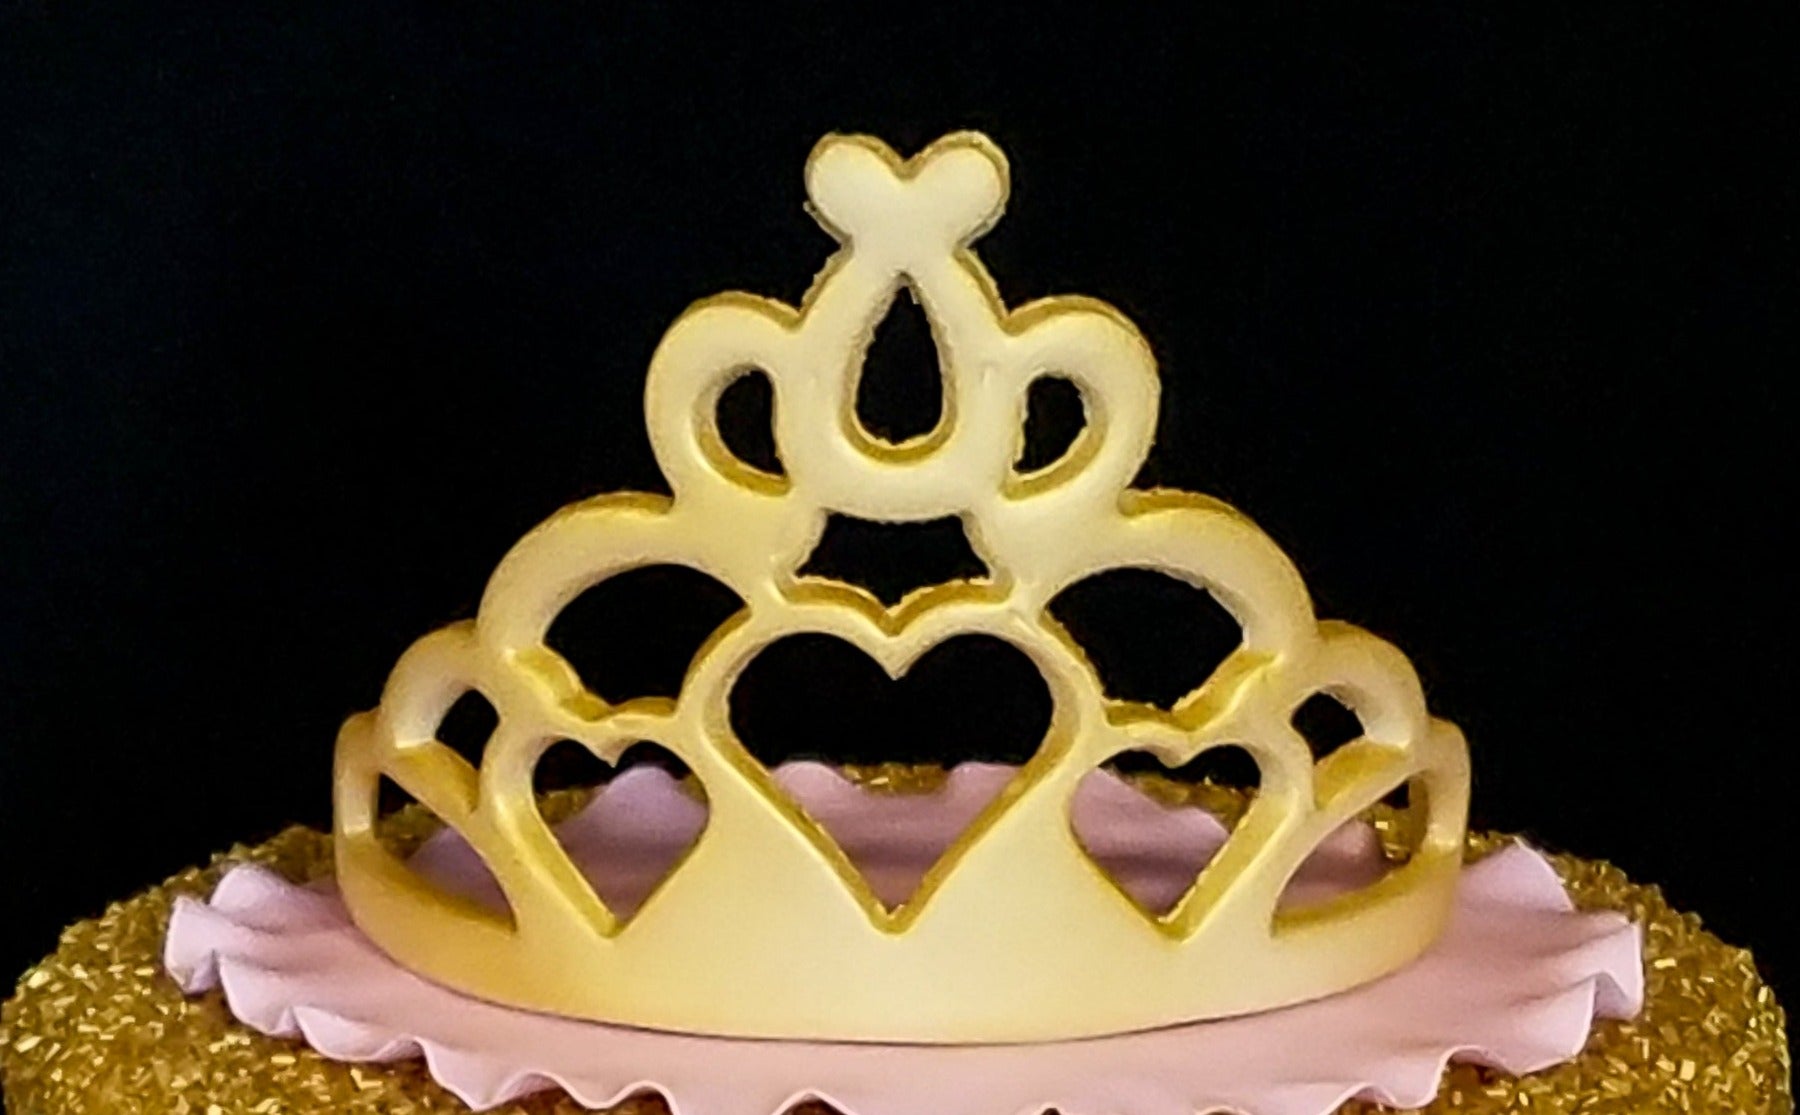 Cake Add-on: Crown – Storybook Bakery